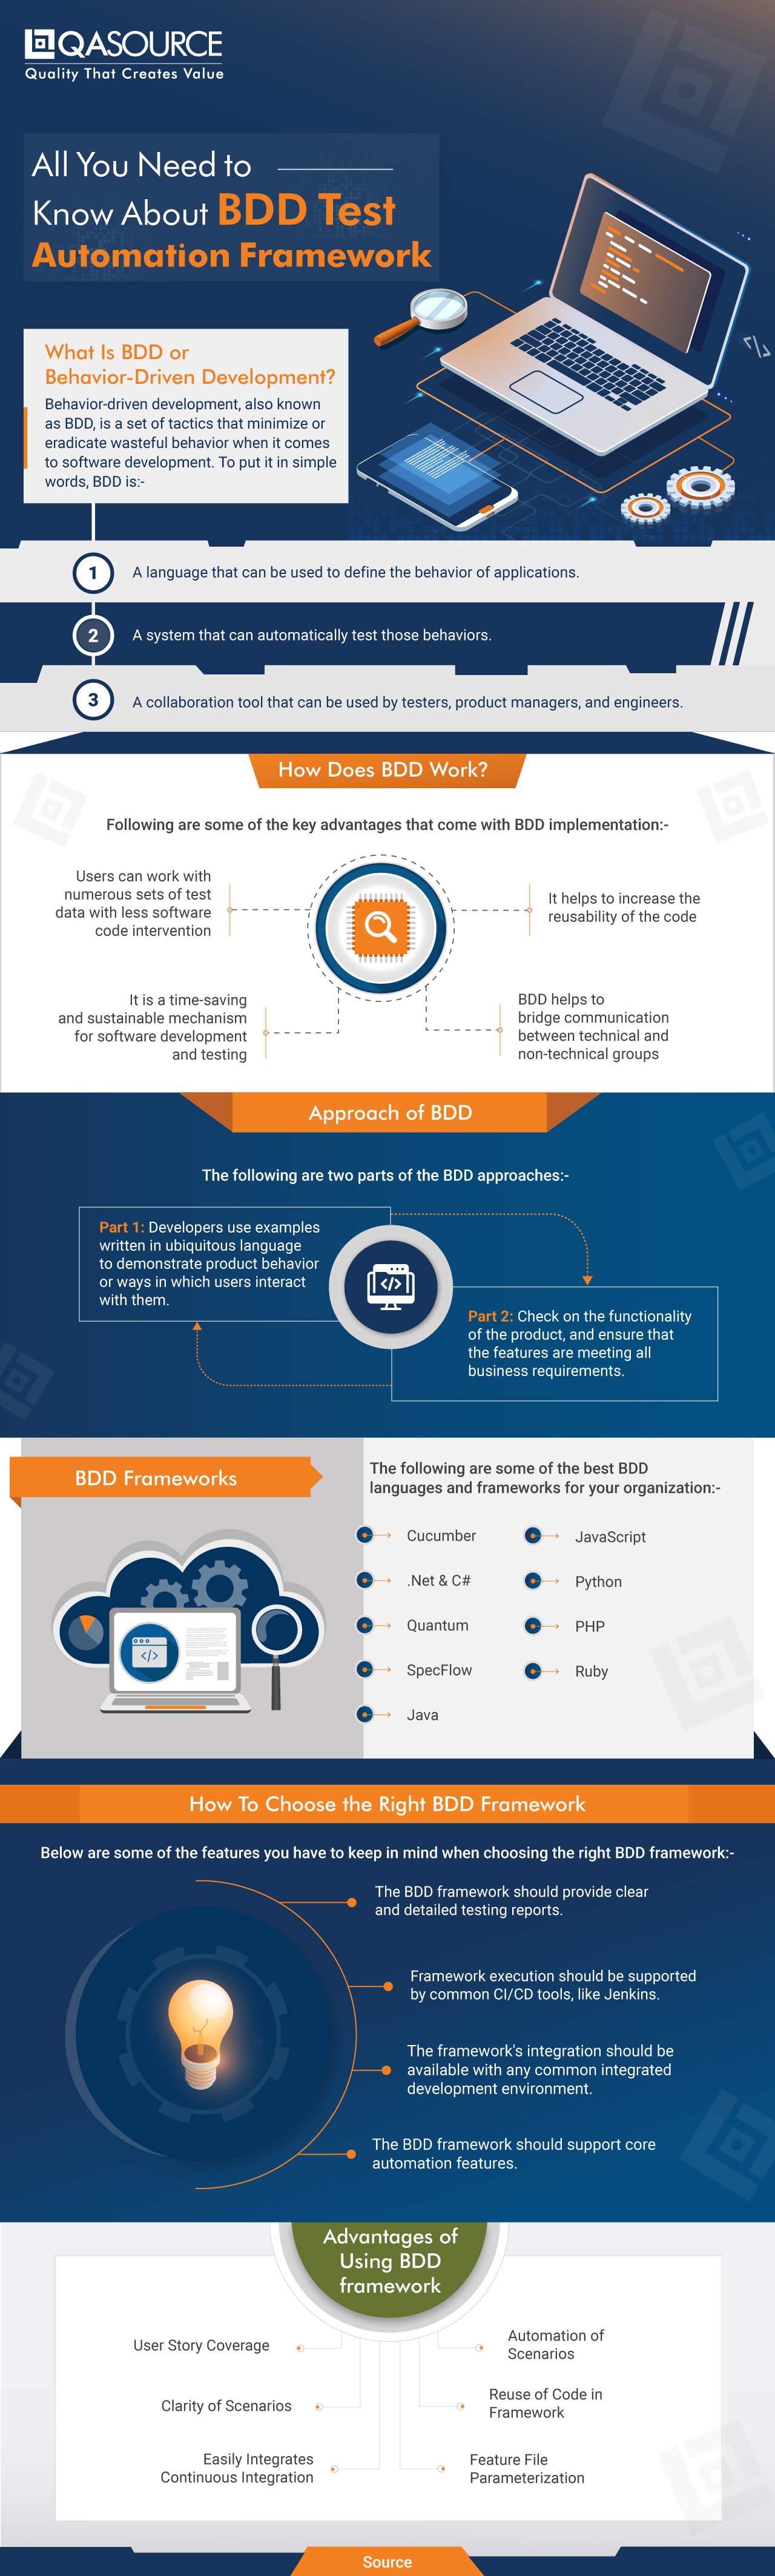 All You Need to Know About BDD Test Automation Frameworks (Infographic)